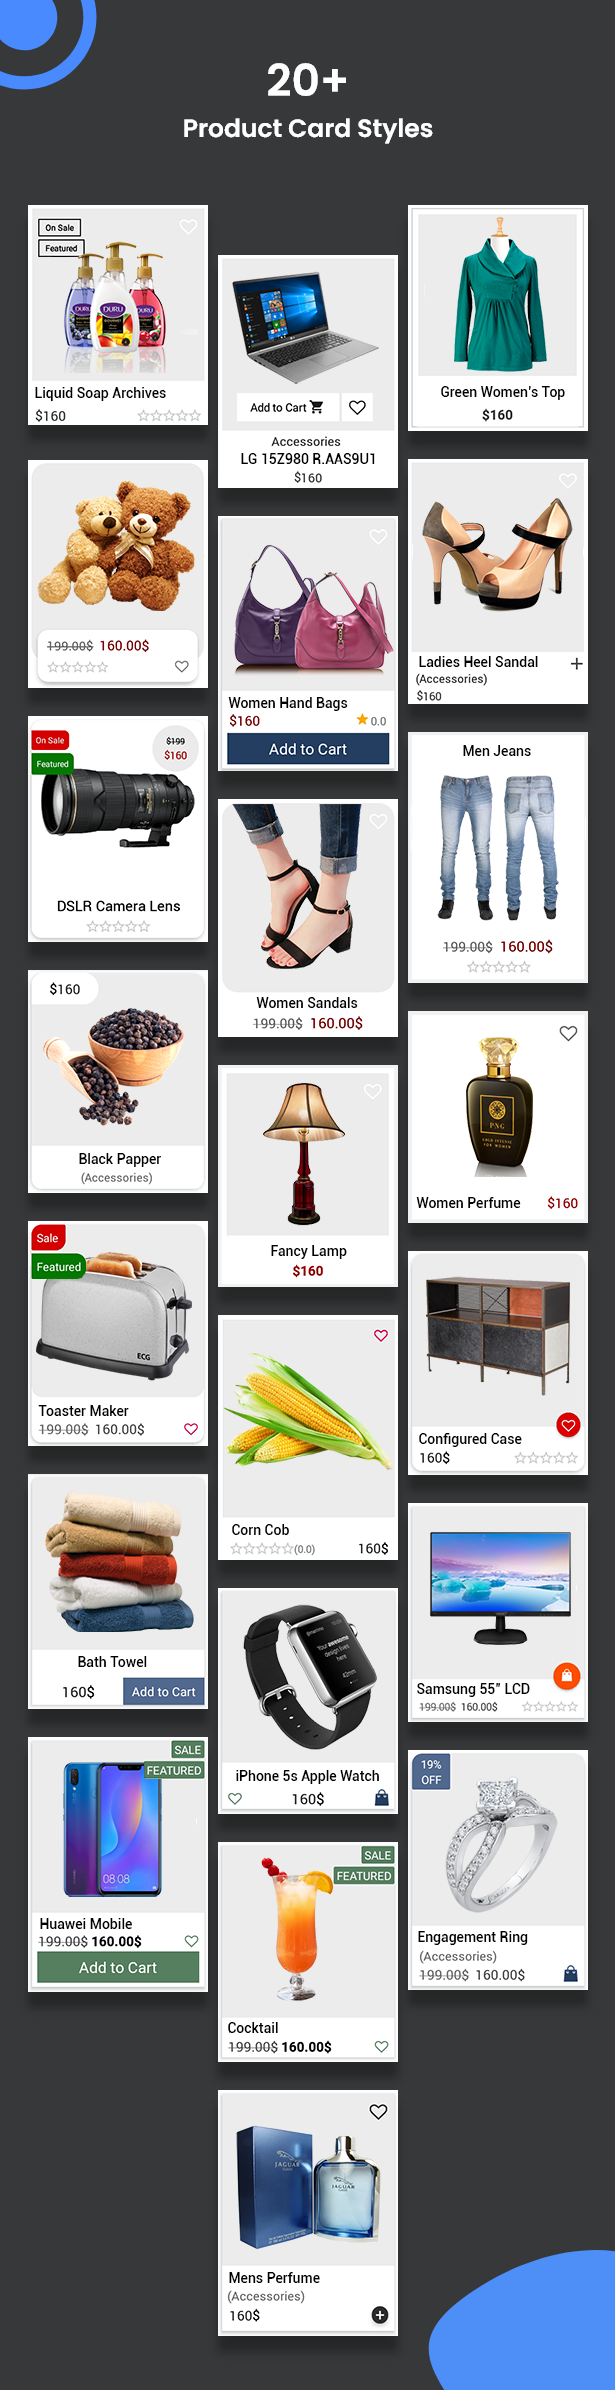 Ionic5 Ecommerce - Universal iOS & Android Ecommerce / Store Full Mobile App with Laravel CMS - 14